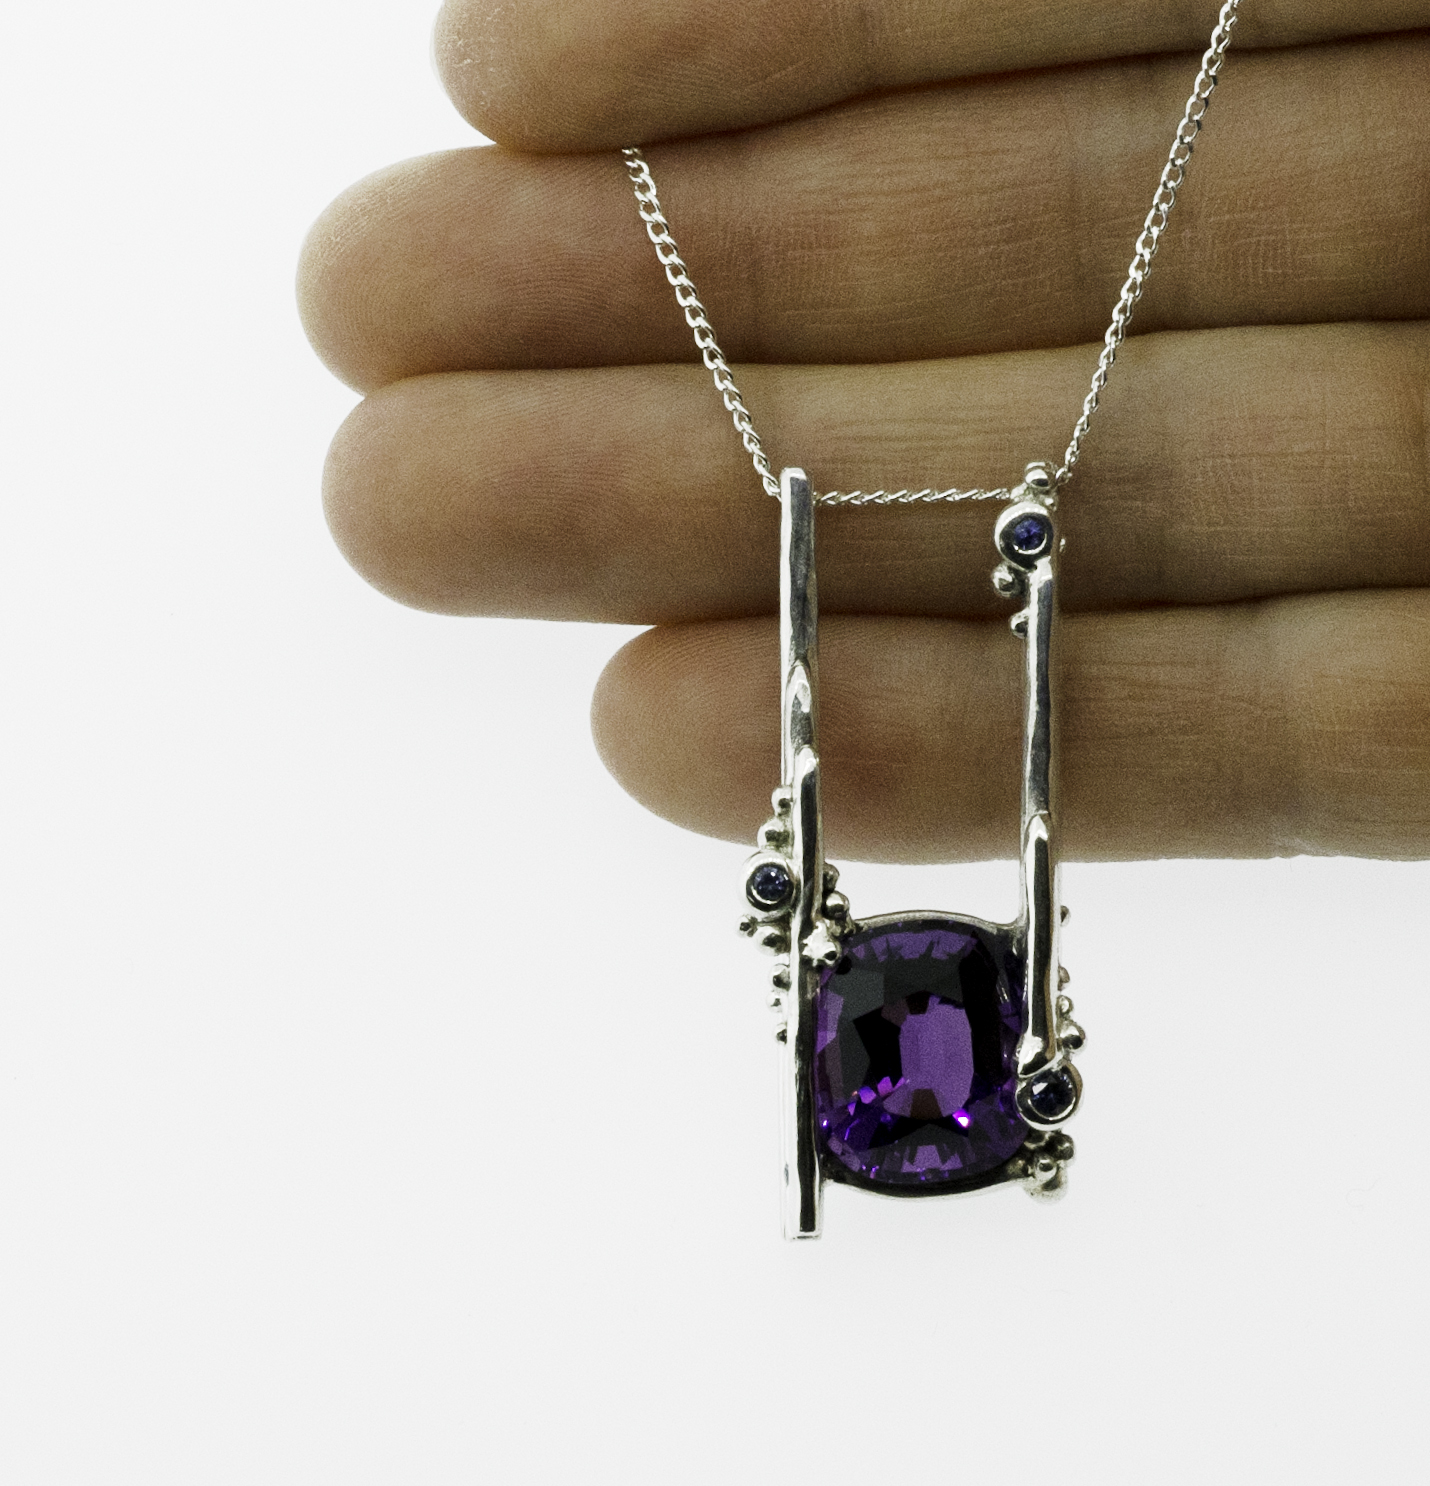 John asked me to make this amethyst pendant for his wife, Katia to celebrate the birth of their first child. To them, this necklace tells a story of love and connection. Read more about the inspiration and design process behind this piece here .